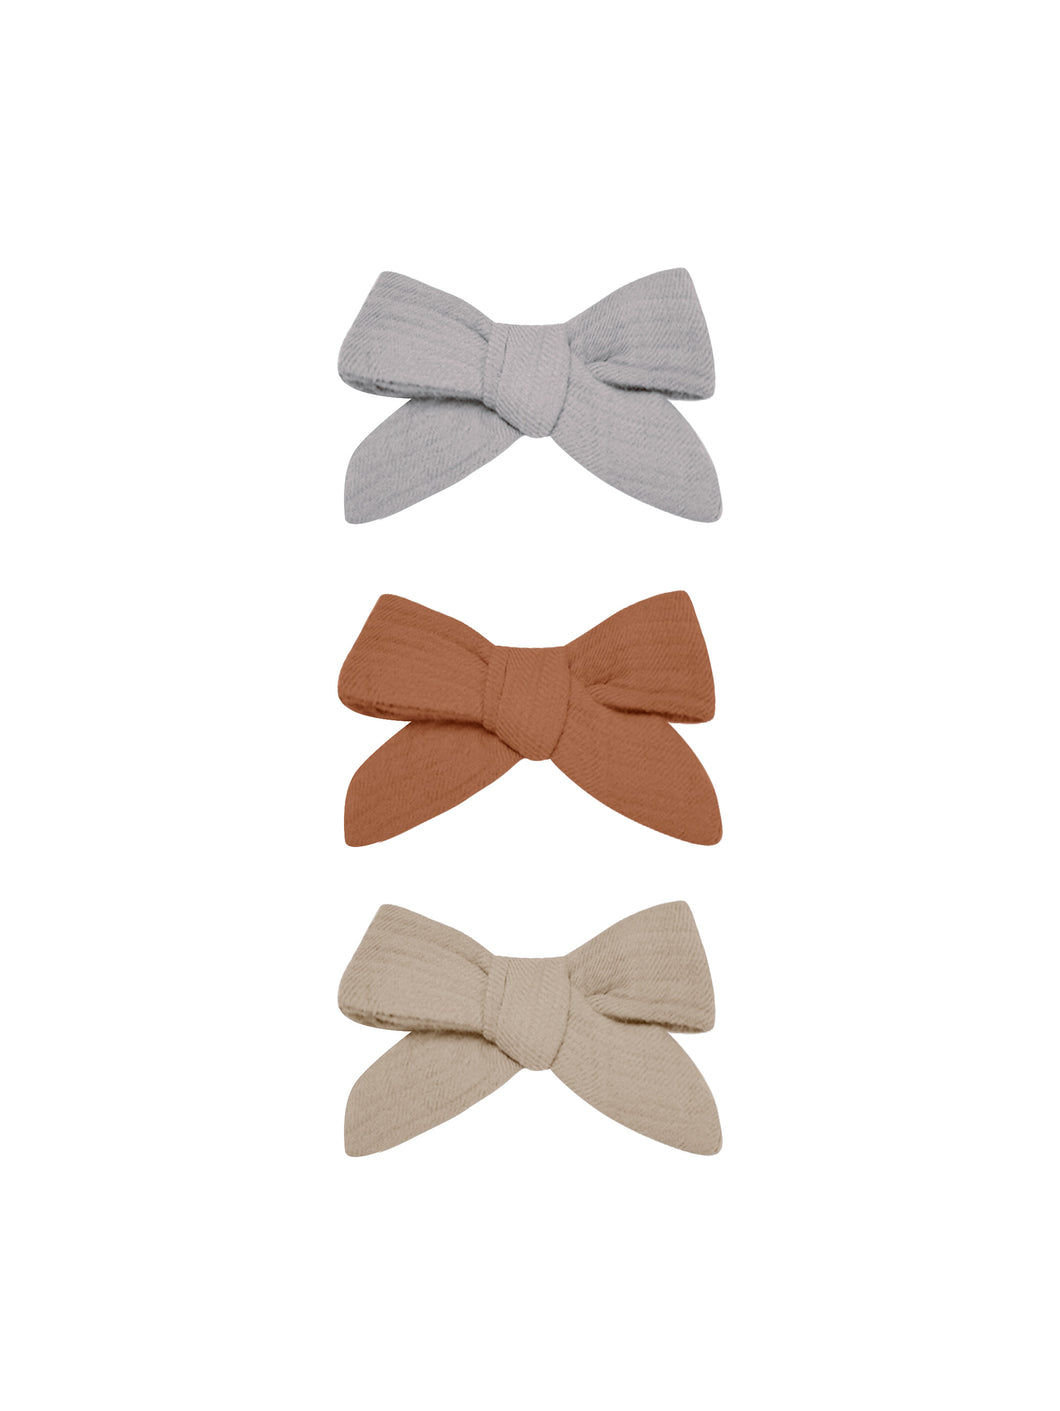 3pc Clips Bows  - Periwinkle, Clay, & Oat